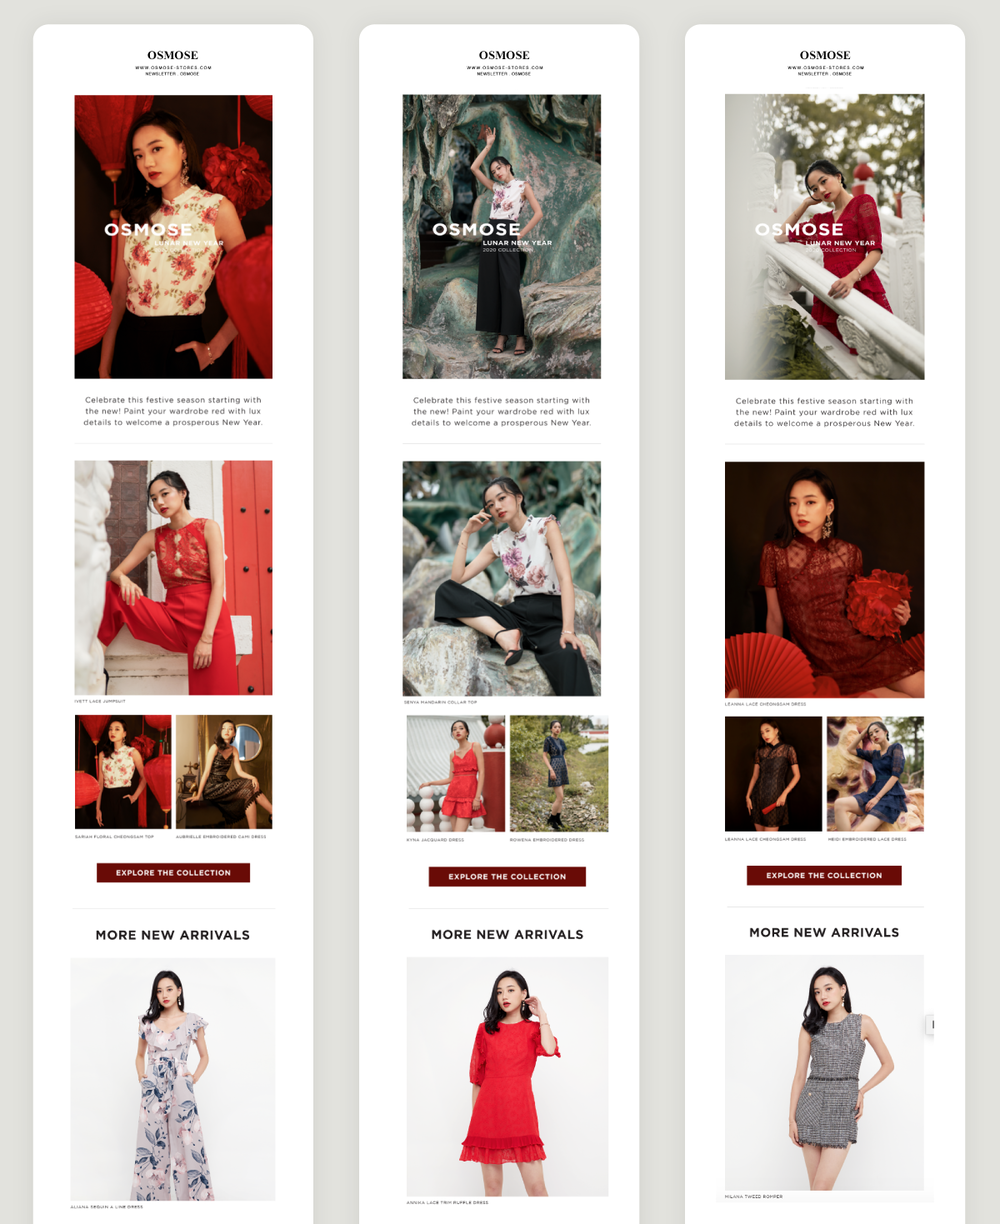 Alt Tag: 3 Chinese New Year-themed emails showcase the OSMOSE Brand with themes of the colour read and floral patterned outfits. The email’s are image heavy. The content reads: “Celebrate this festive season starting with the new! Paint your wardrobe red with lux details to welcome a prosperous New Year.” This content is followed by a button CTA that prompts: Explore the collection.